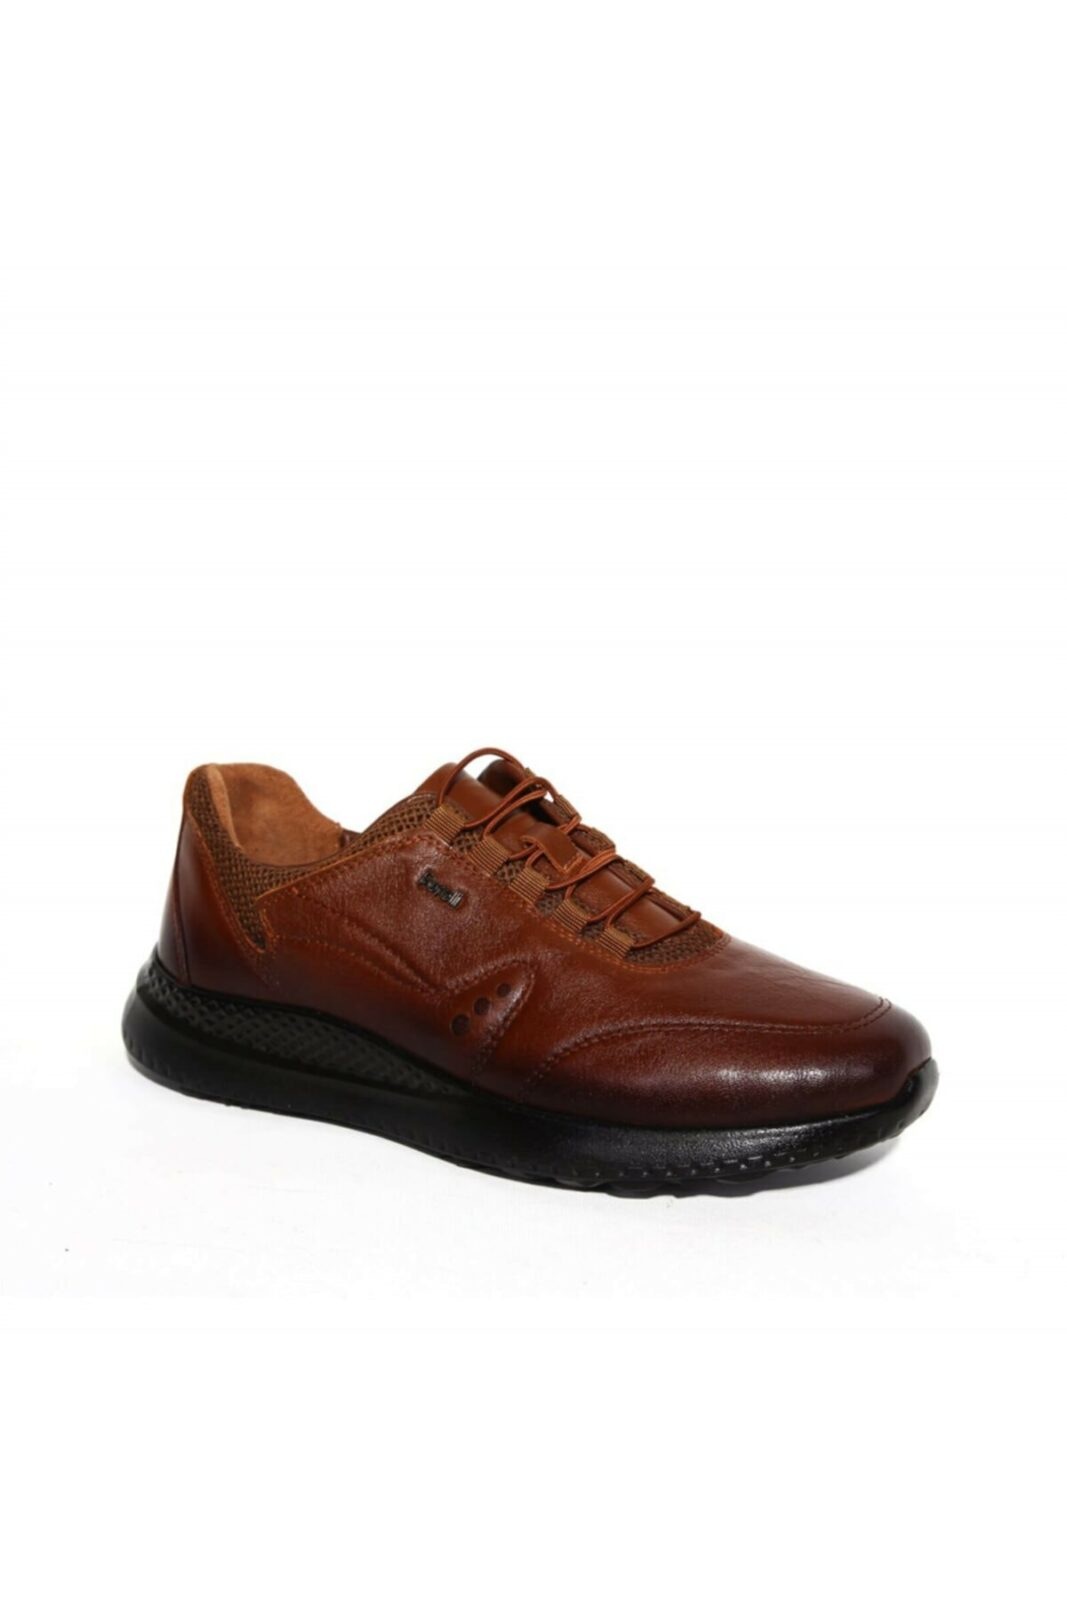 Forelli Walking Shoes - Brown